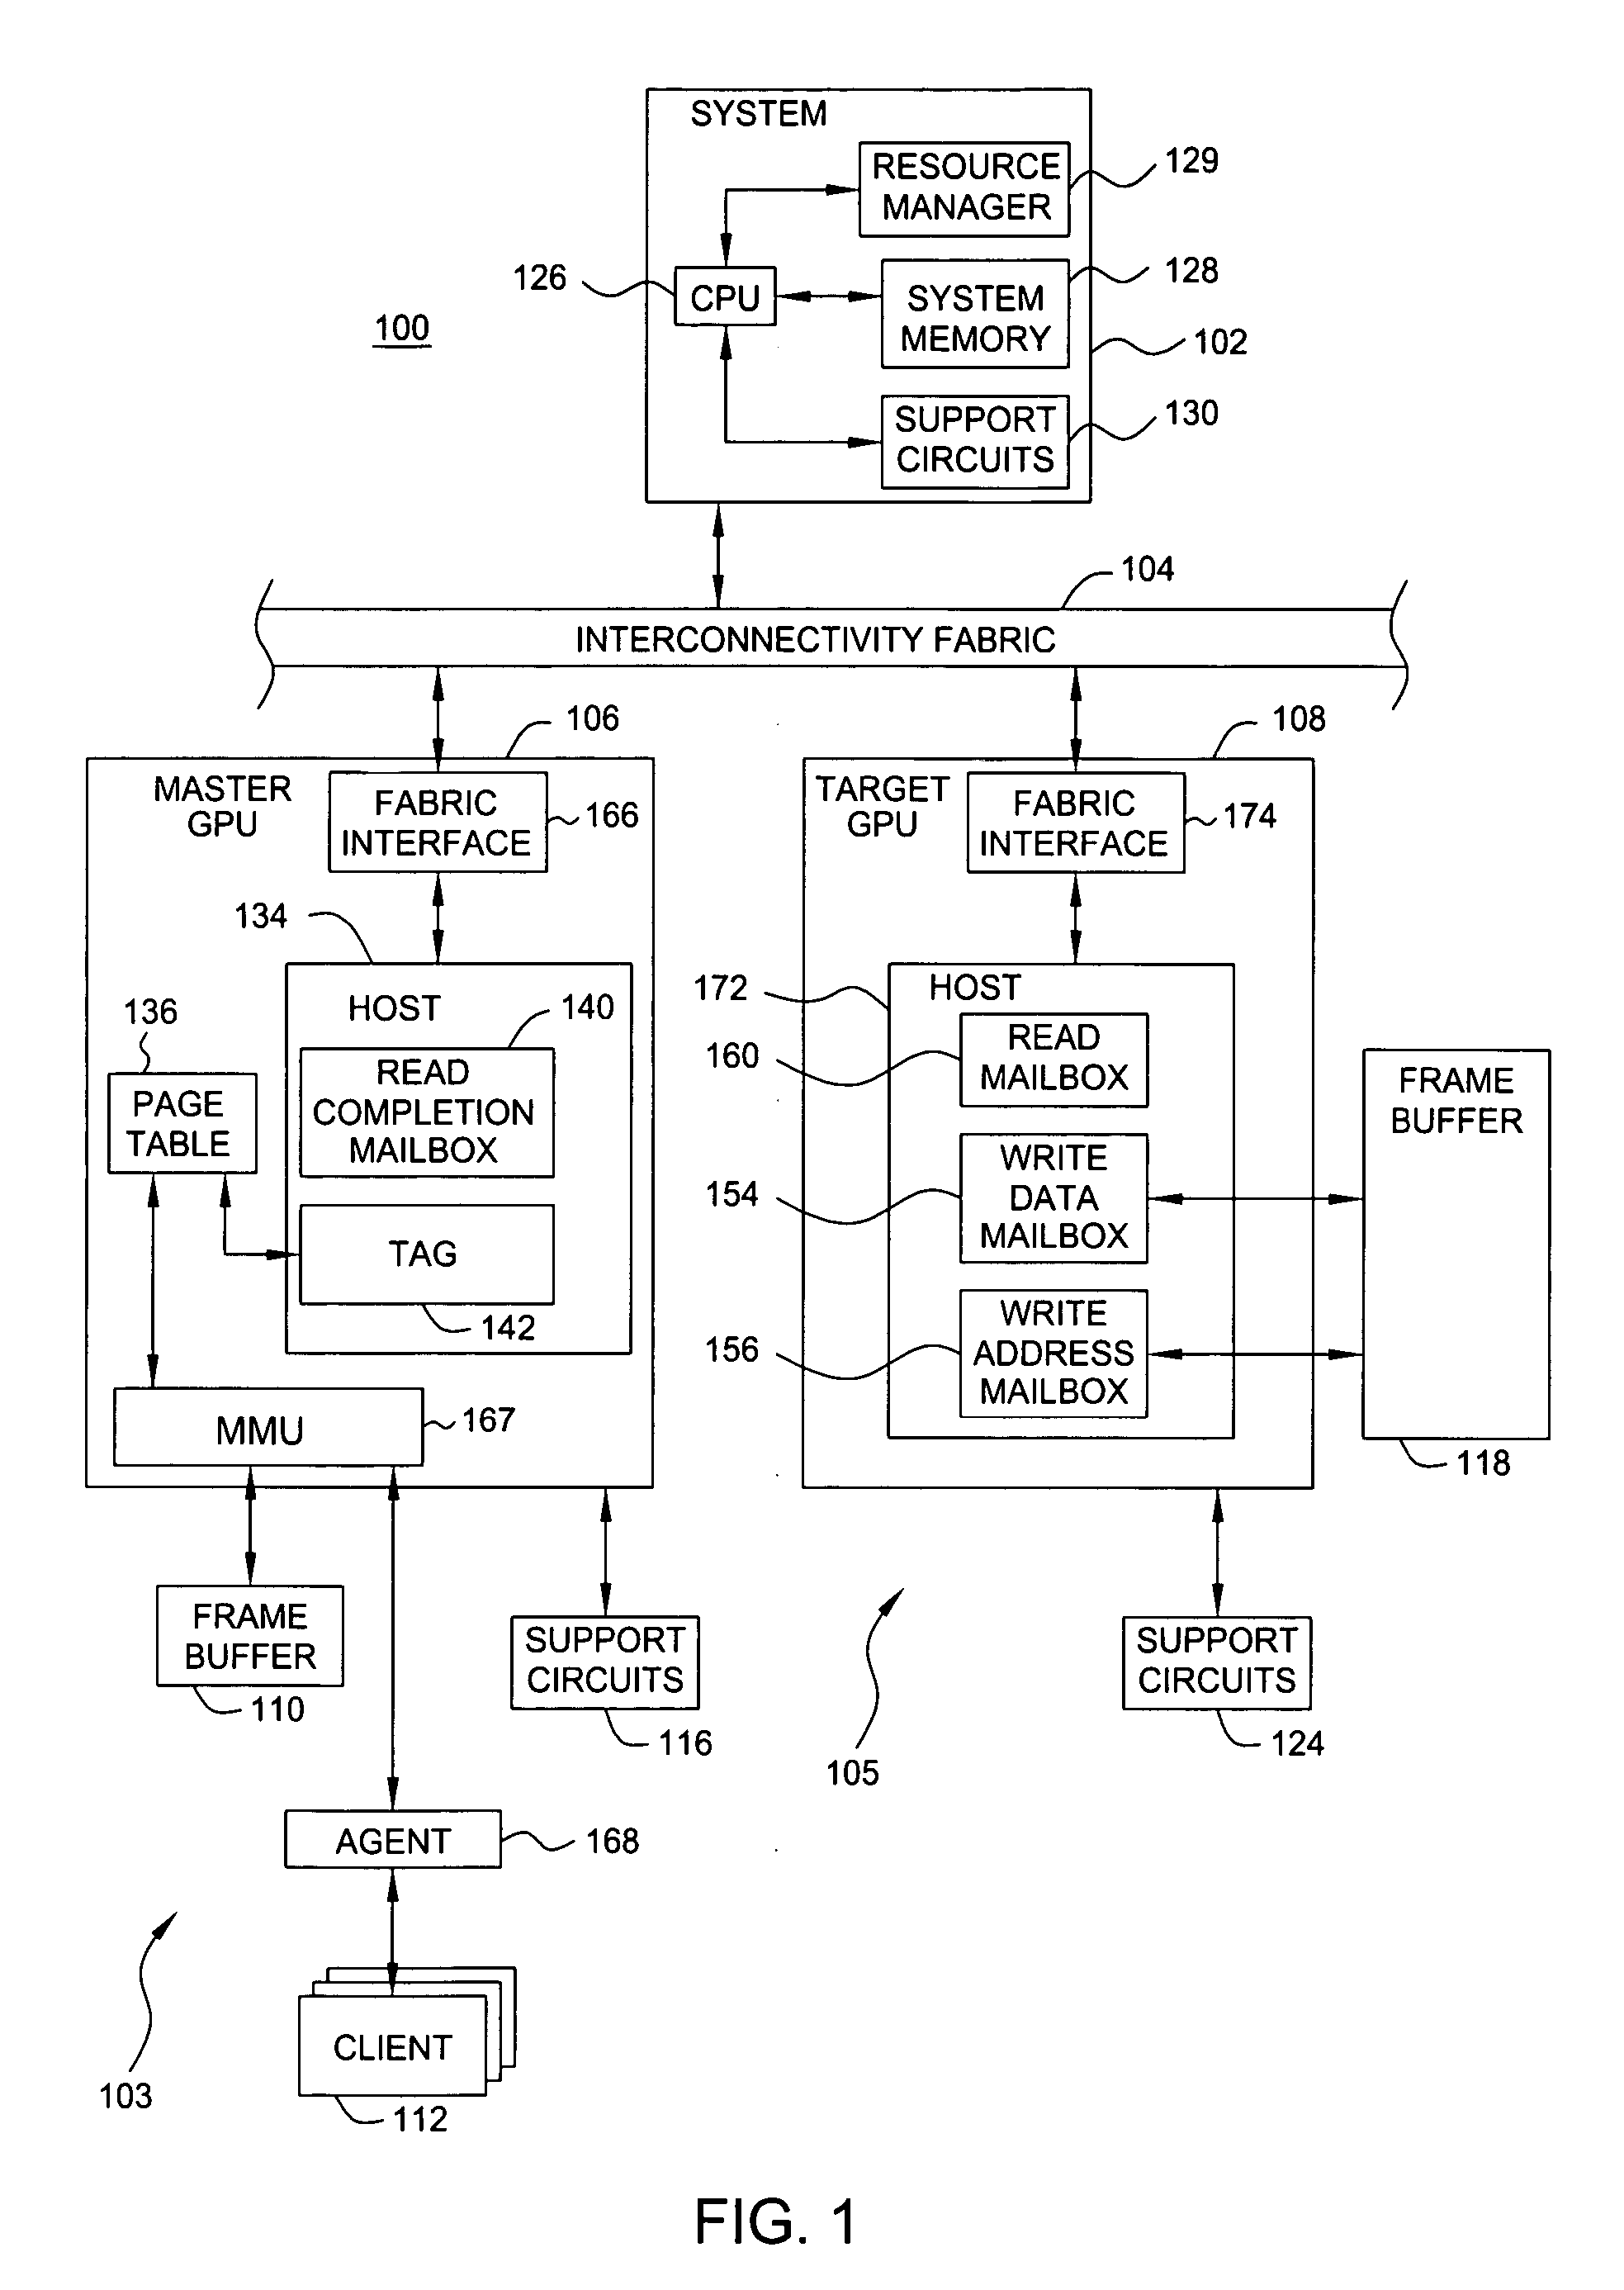 Method and apparatus for providing peer-to-peer data transfer within a computing environment